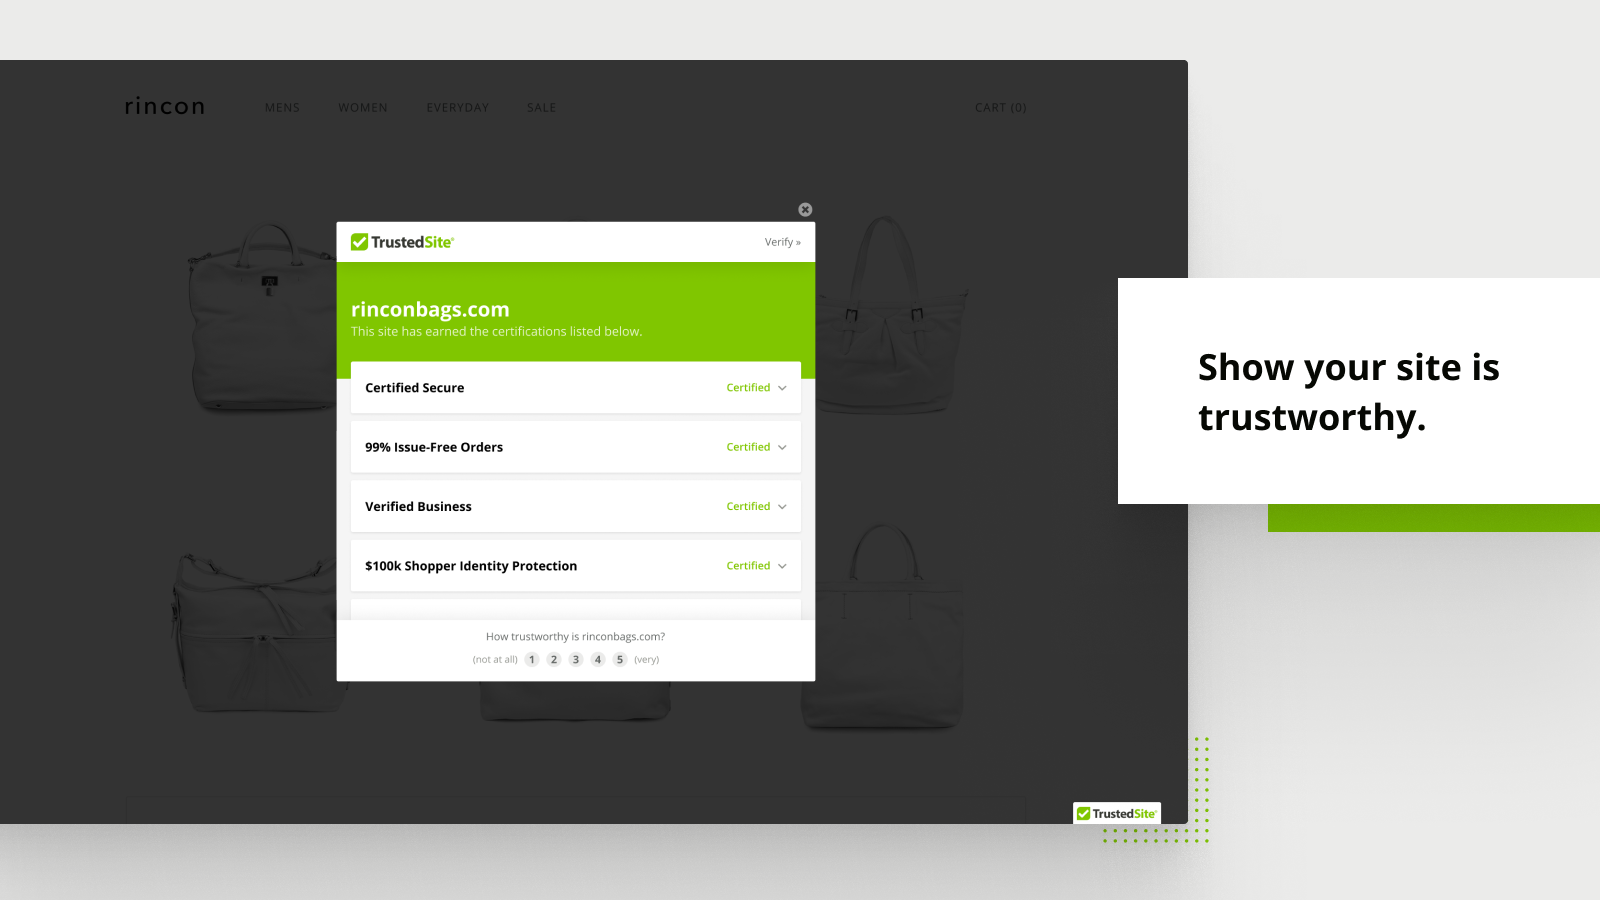 Show your site is trustworthy.